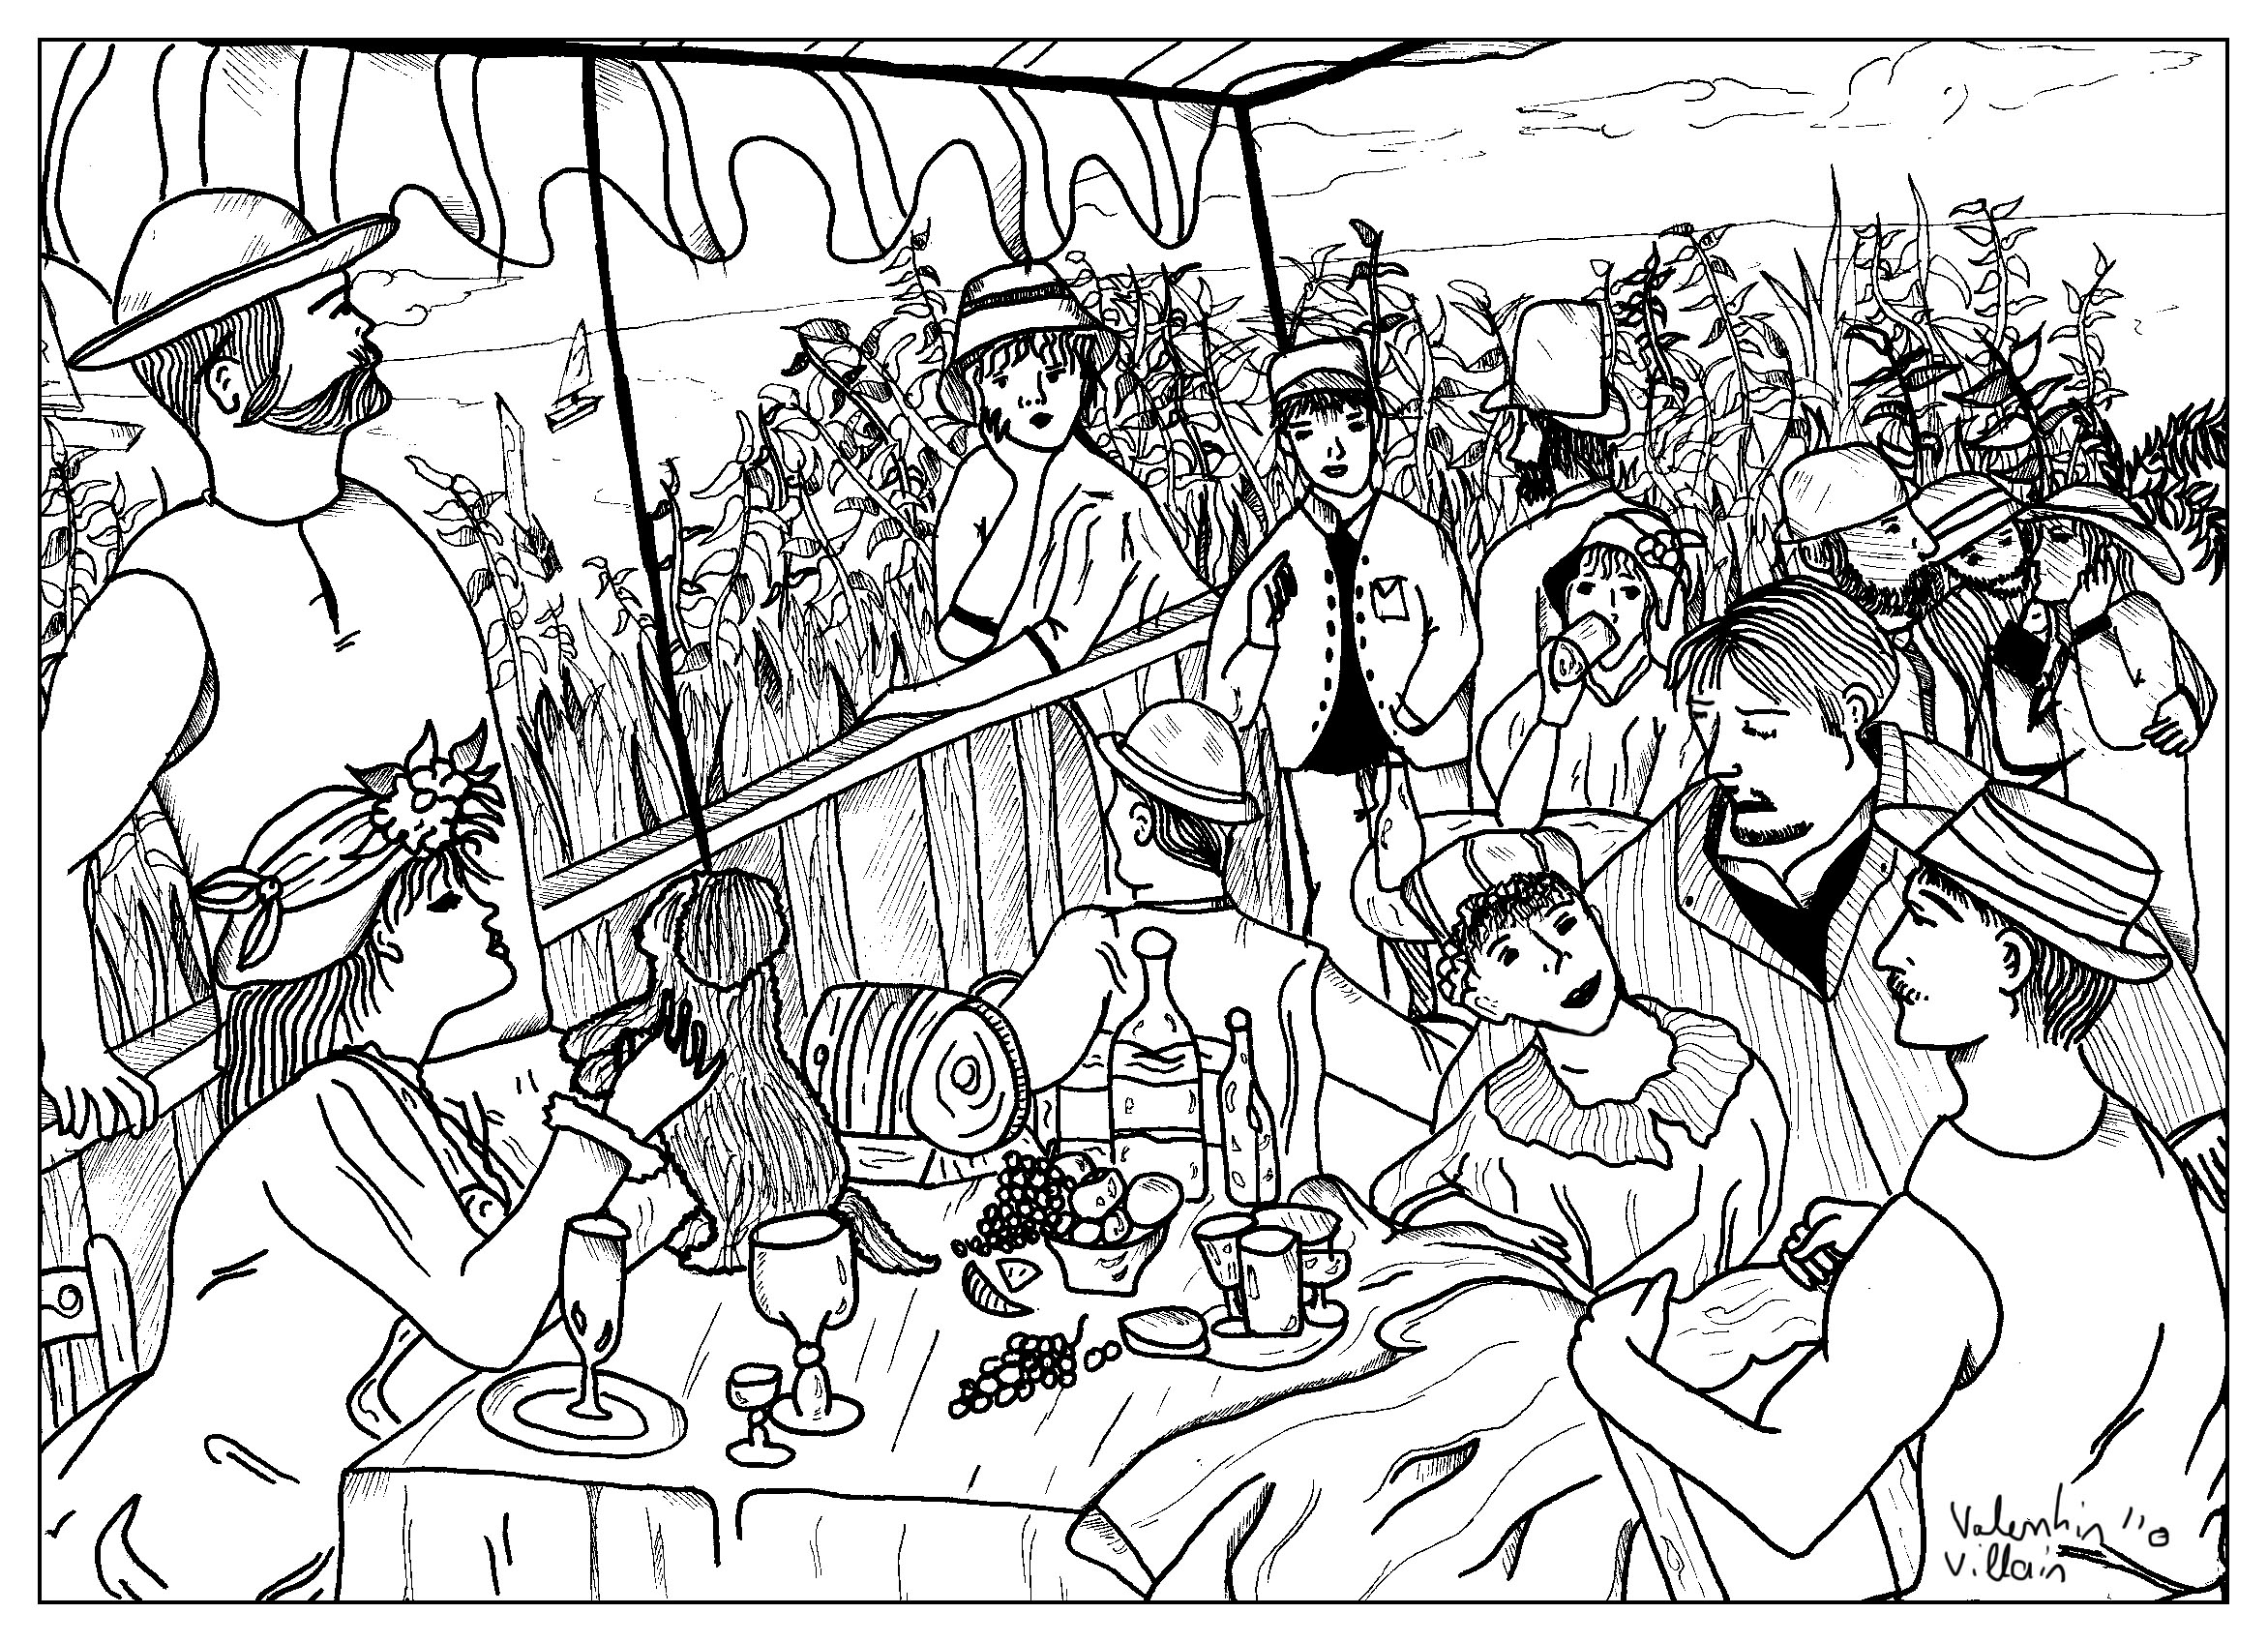 Coloring page inspired by 'Le Déjeuner des Canotiers' (1880–1881) by Pierre-Auguste Renoir, French leading painter in the development of the Impressionist style. 'Le Déjeuner des Canotiers' is a celebrated masterpiece from the Impressionist era, depicting a leisurely scene of people enjoying lunch at a riverside restaurant in Chatou, France.The painting is known for its vibrant colors, dappled sunlight, and the artist's signature focus on capturing the fleeting moments of everyday life, exemplifying the essence of Impressionism, Artist : Valentin   Artist : Urielle